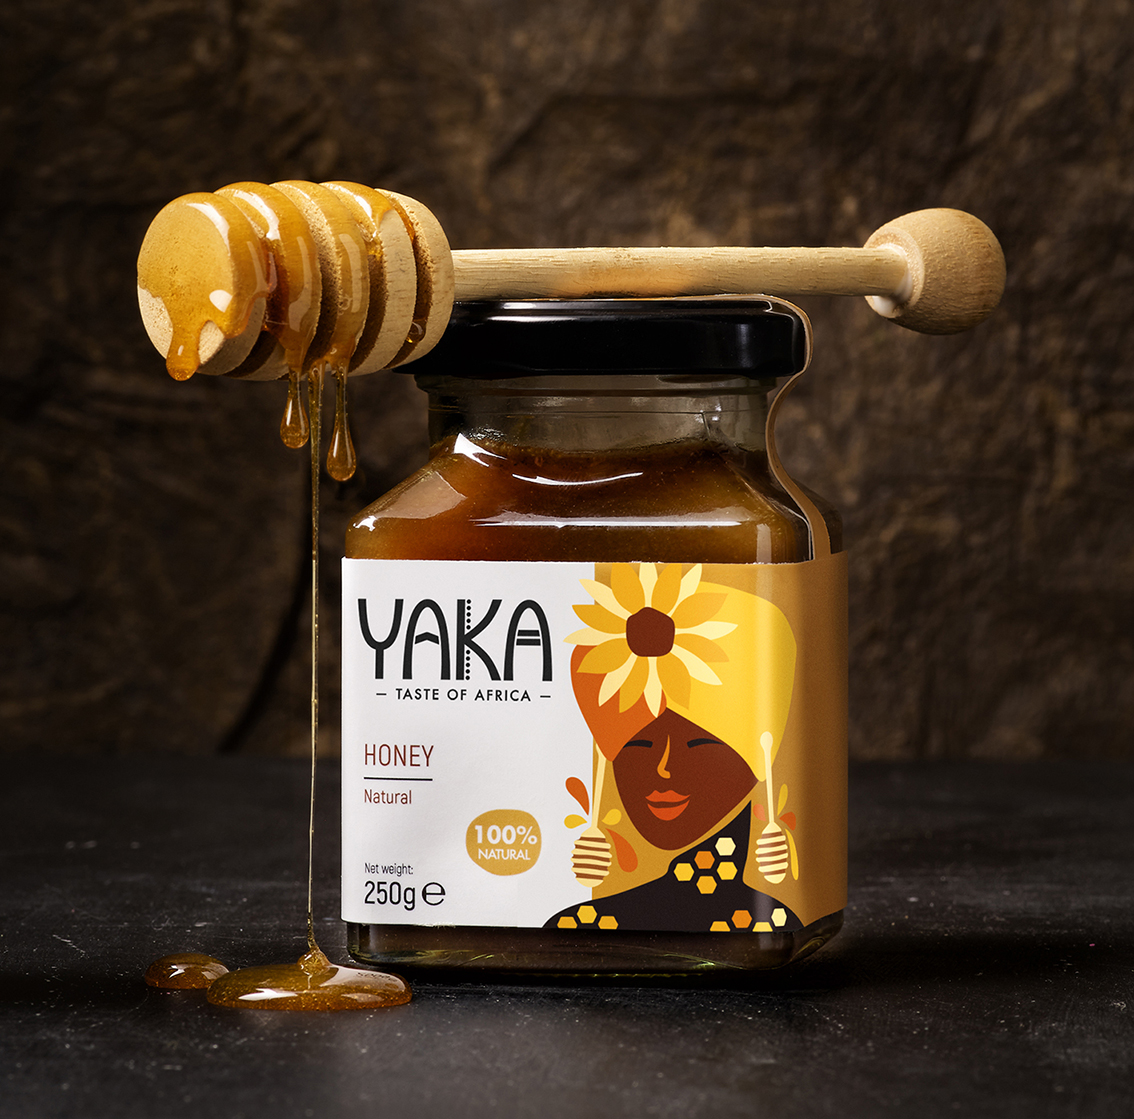 Taste of Afrika Branding and Packaging Design by Quatre Mains for Yaka